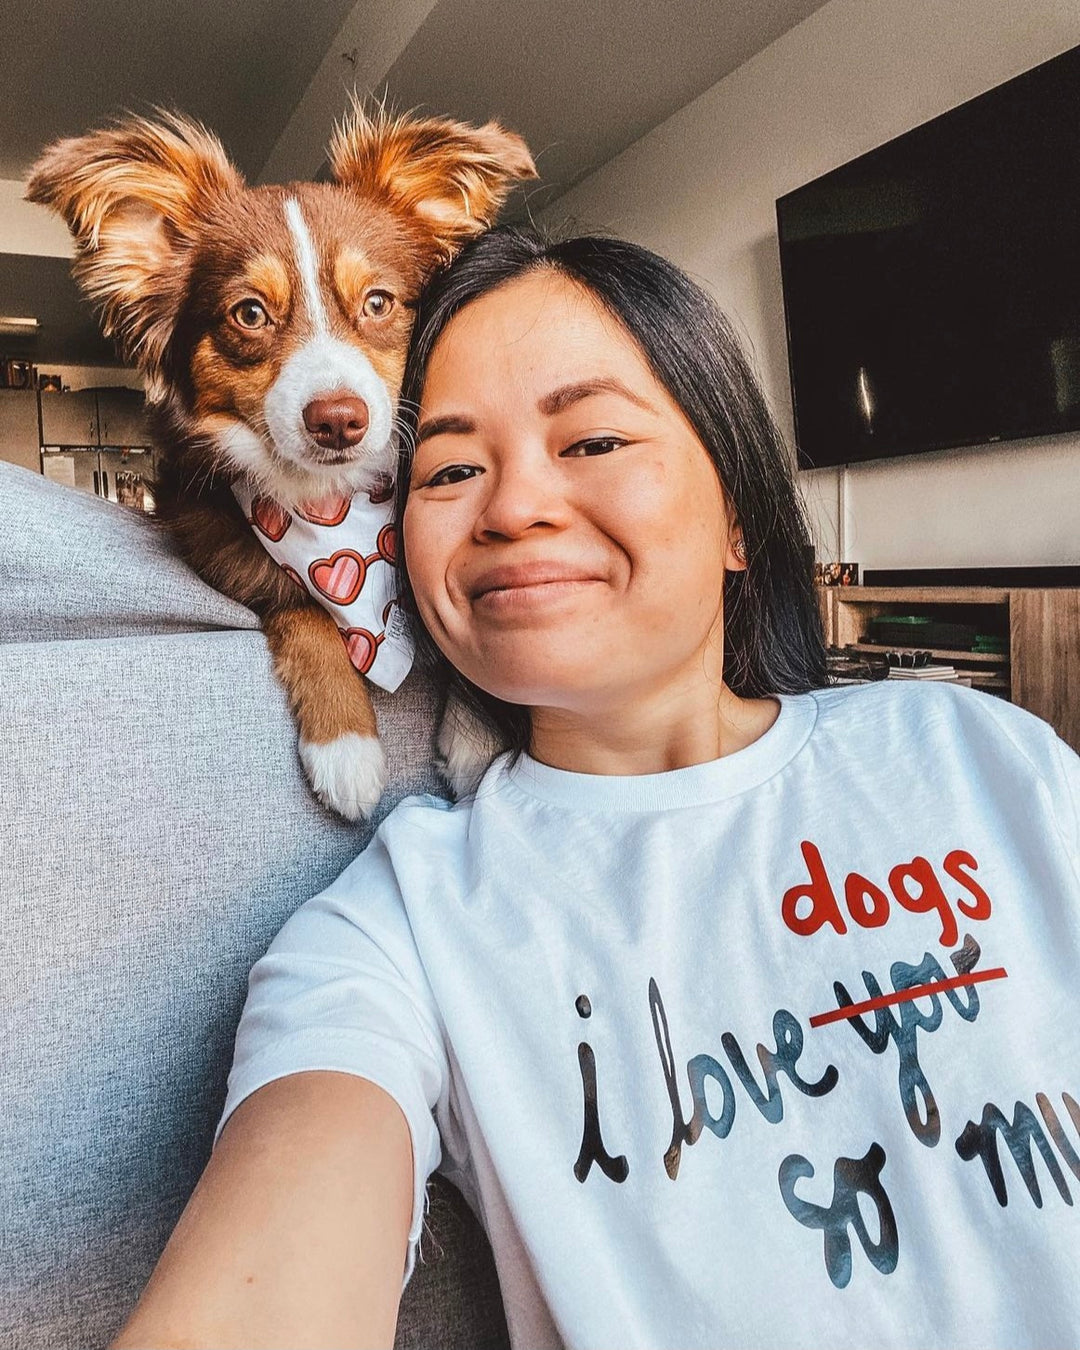 "I Love Dogs So Much" Tee